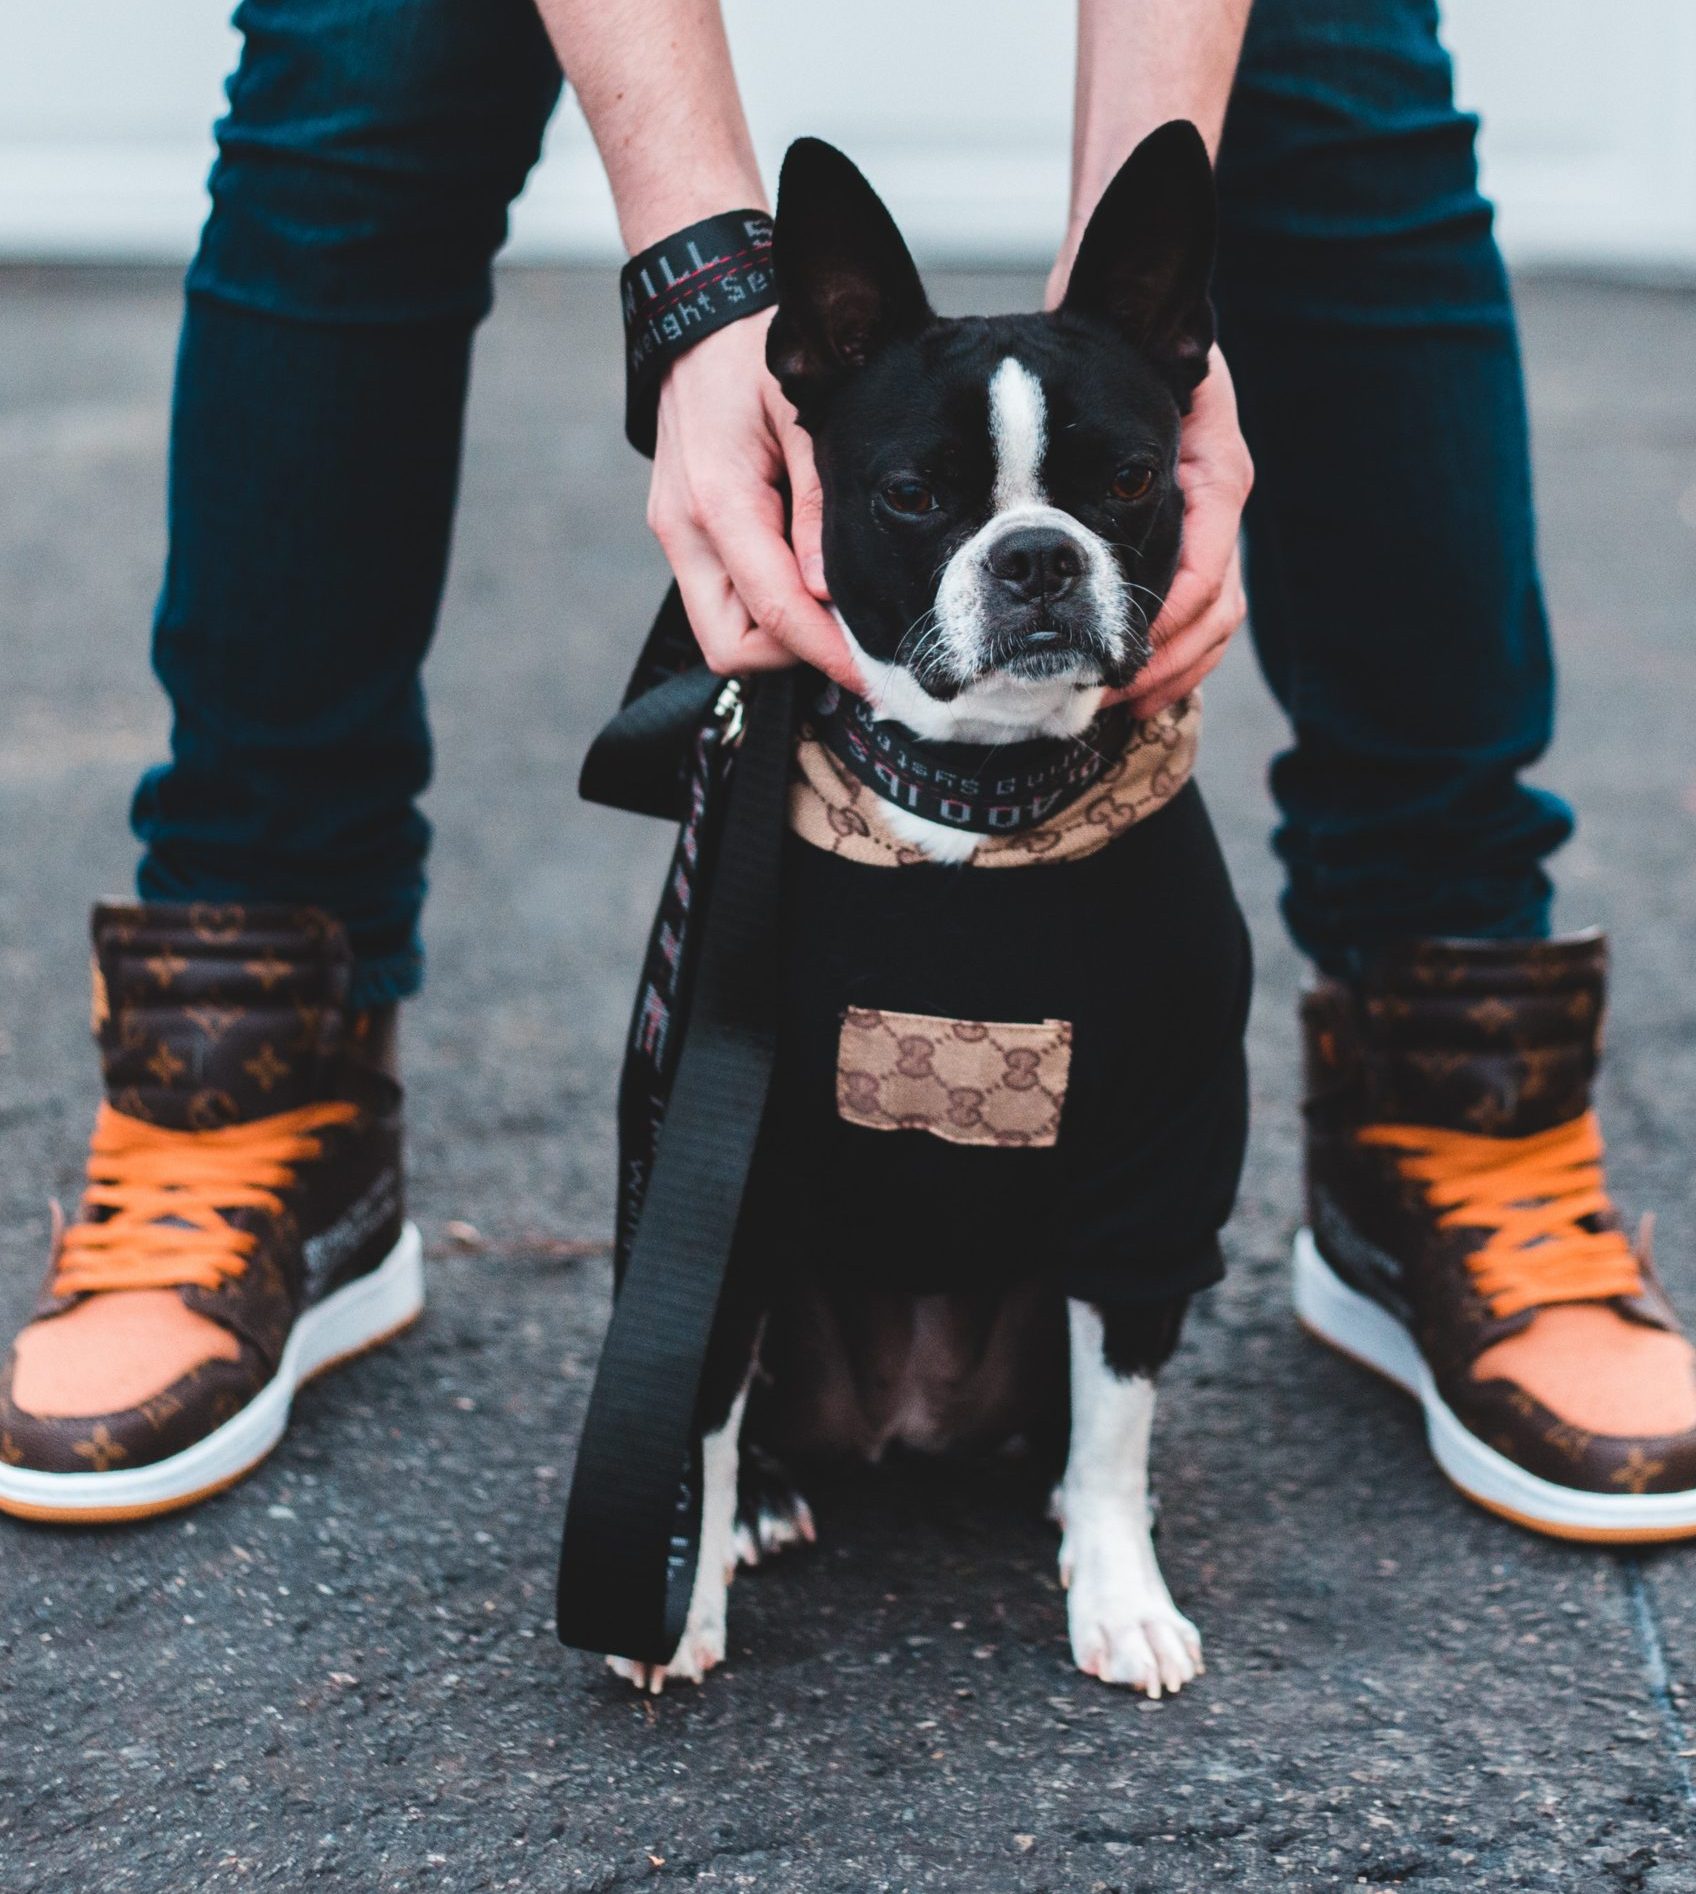 Boston terrier dog on street sitting between a person's legs